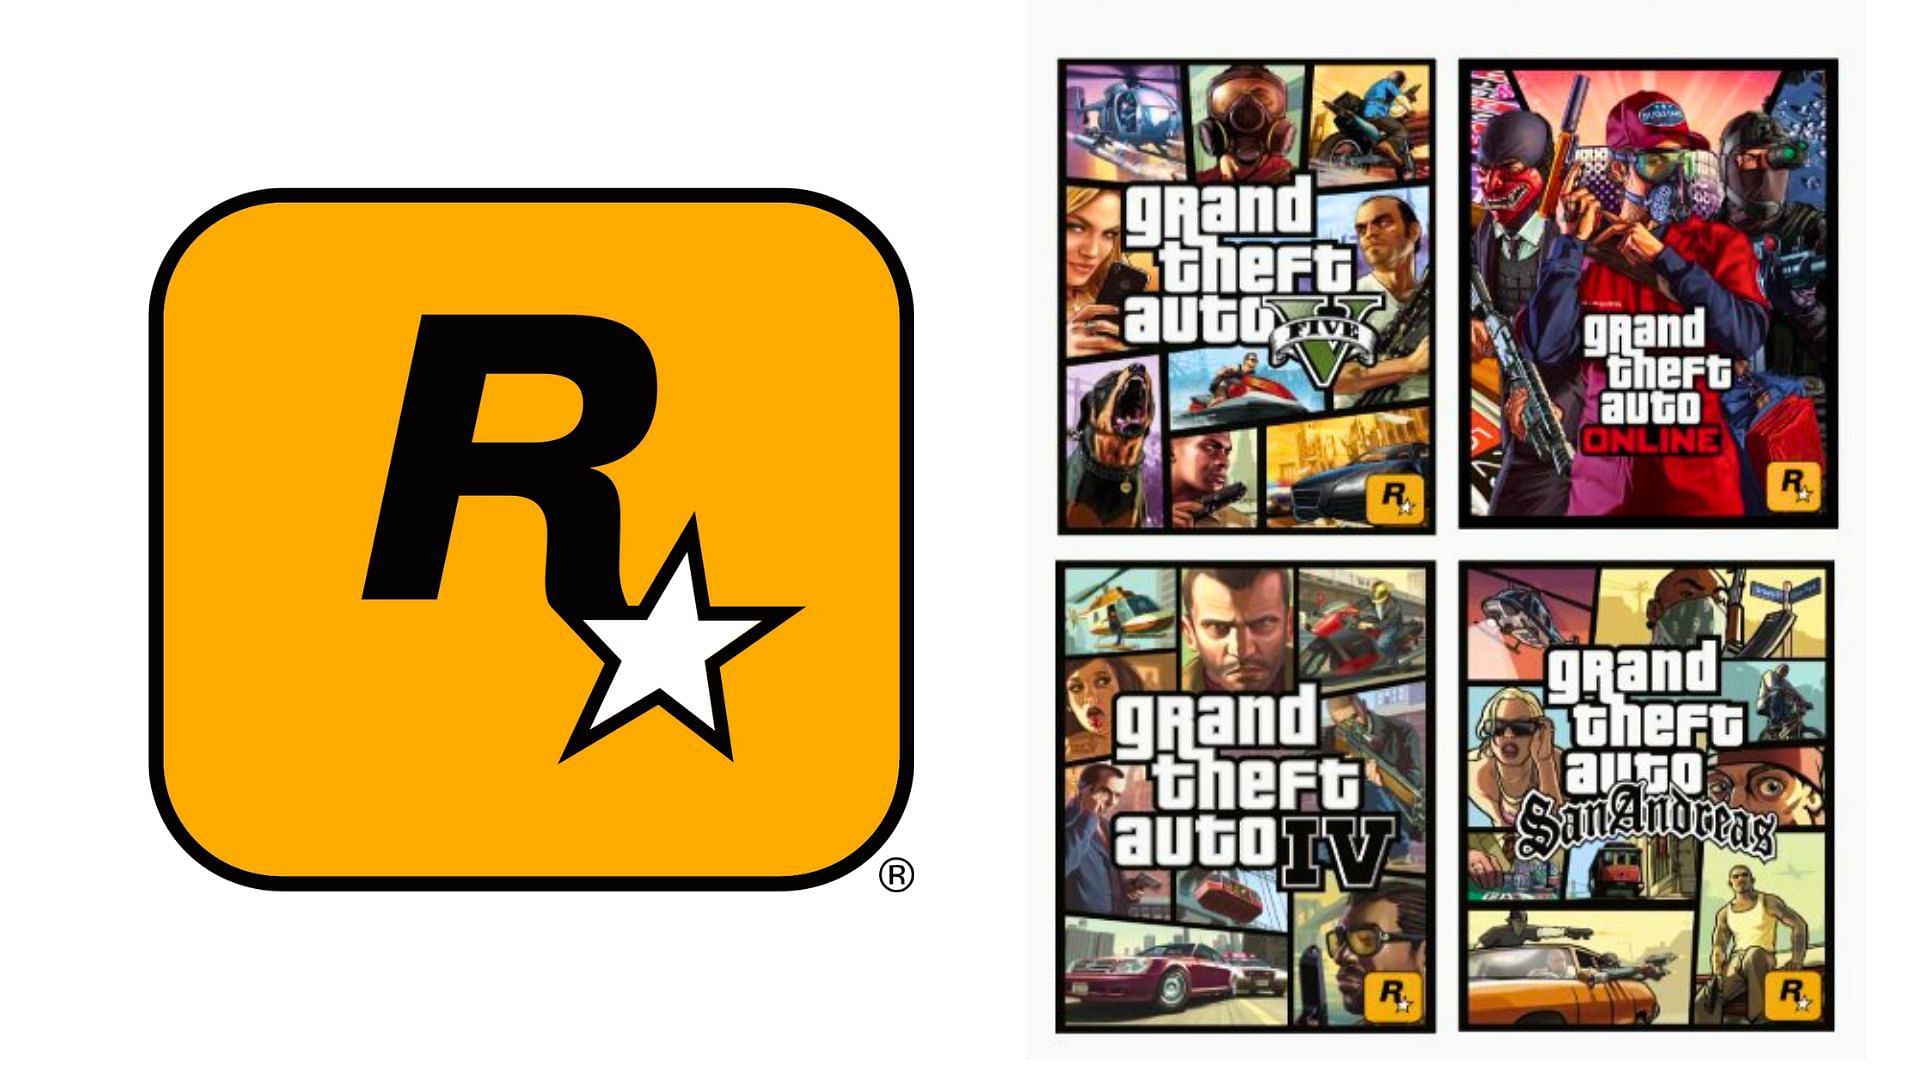 GTA sales remain strong with 425+ million copies sold so far Report